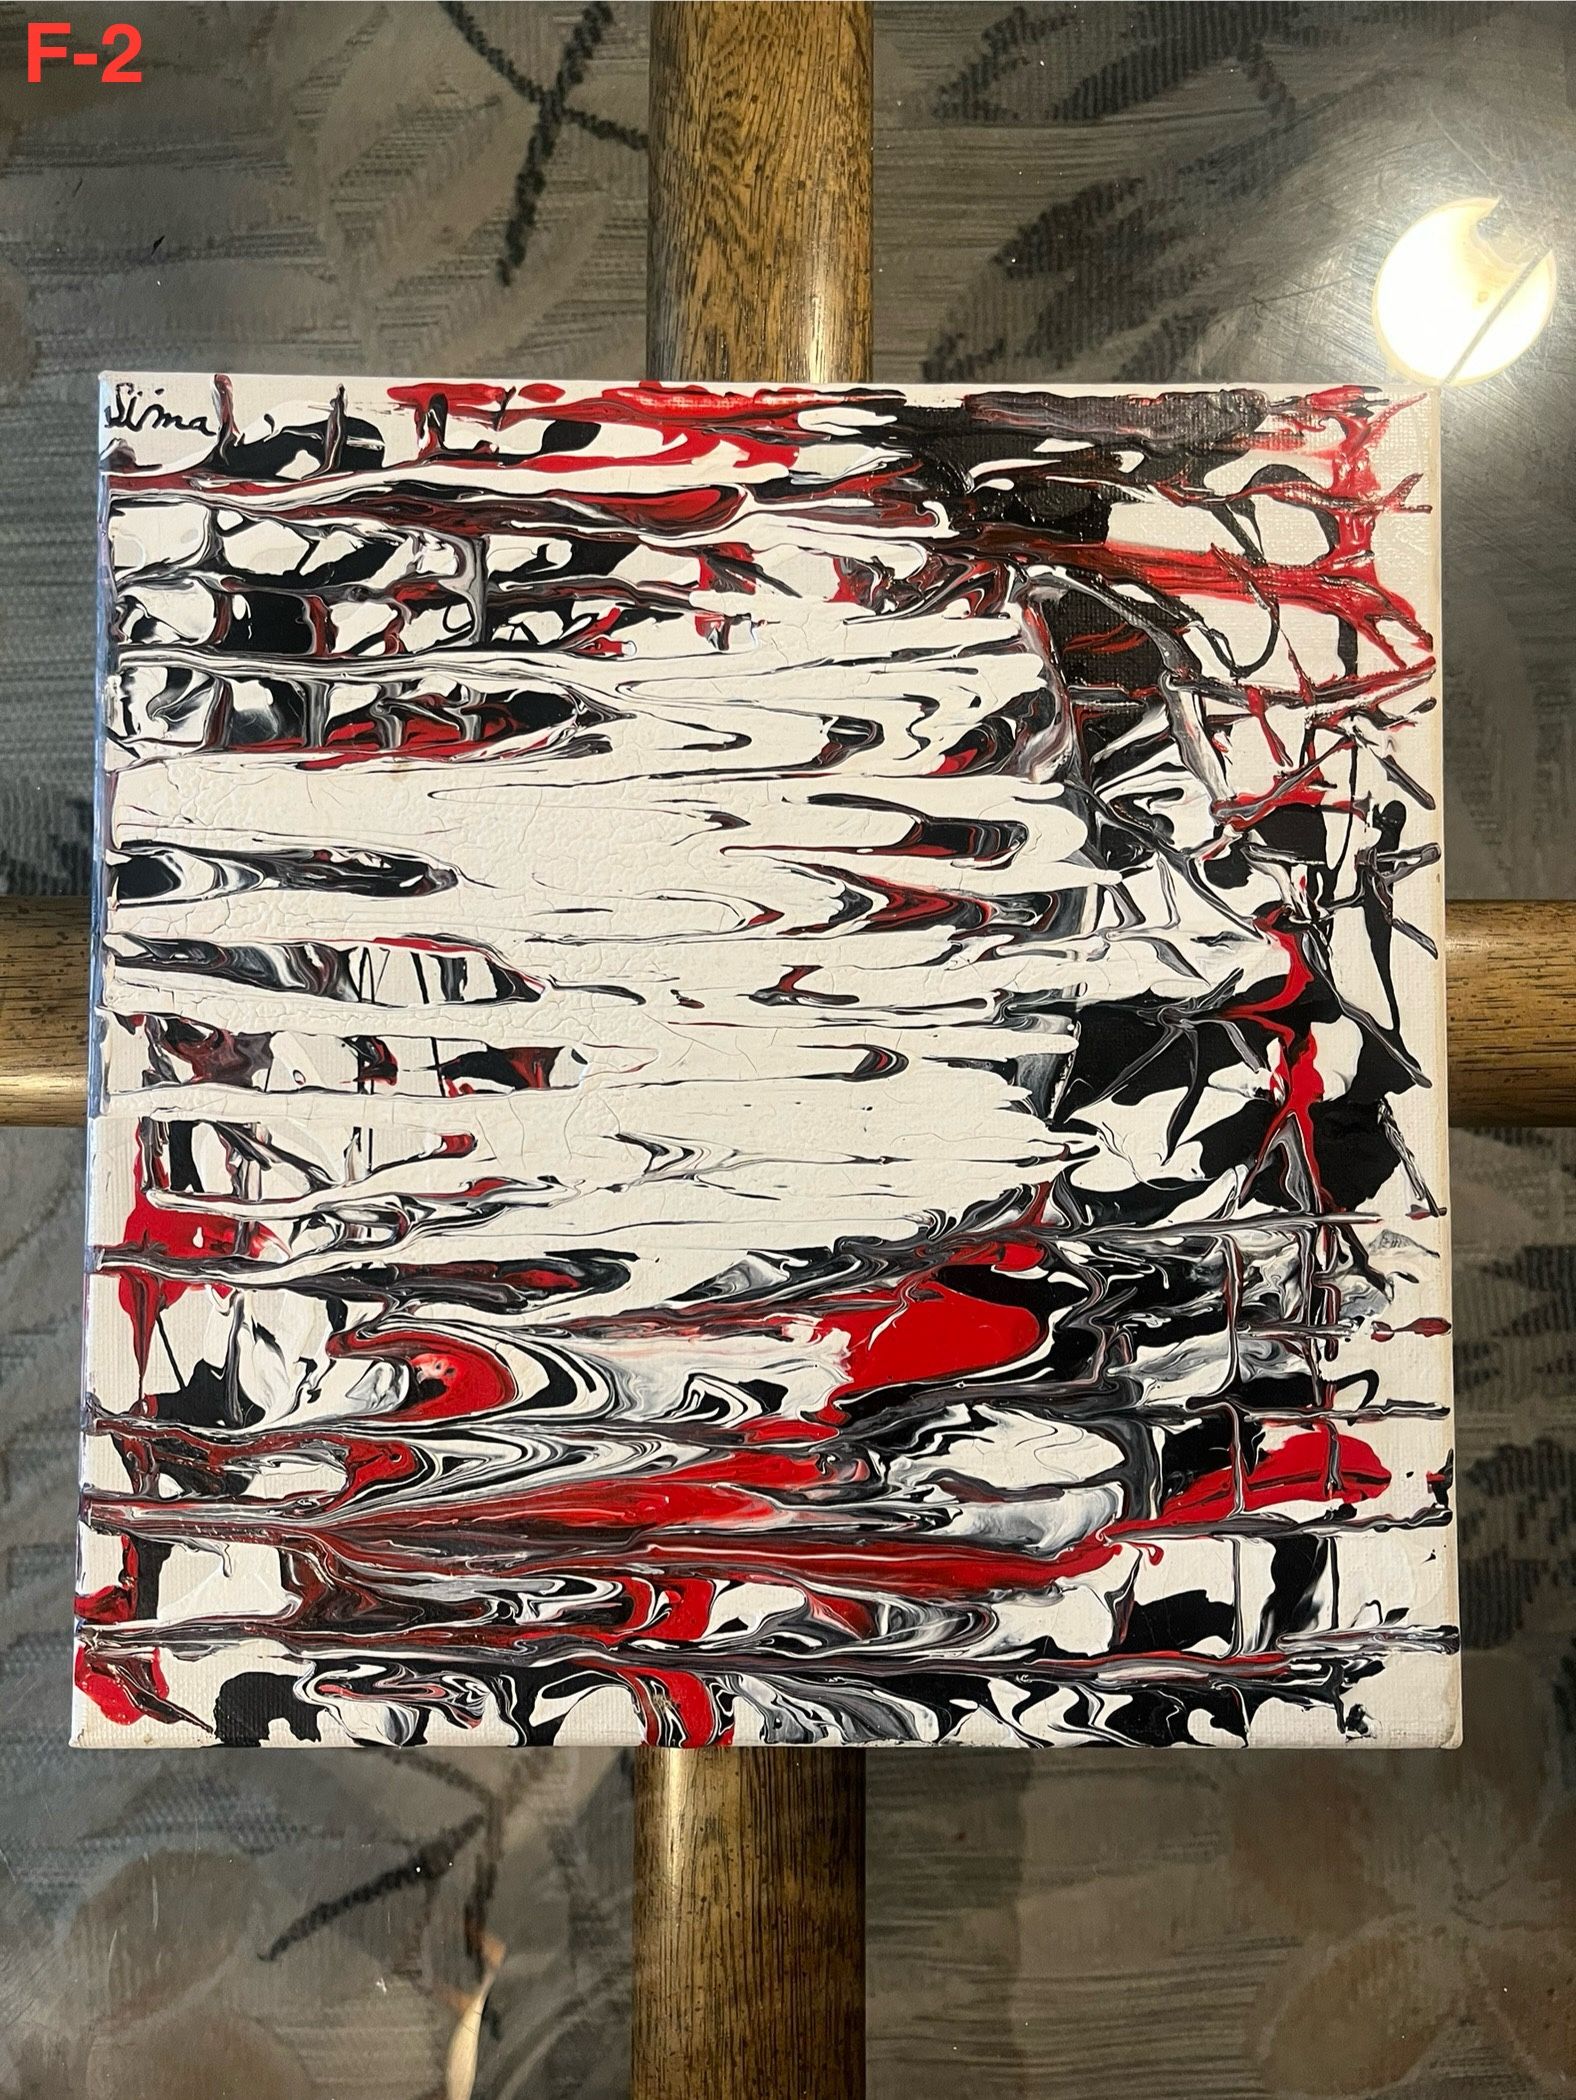 ABSTRACT ACRYLIC PAINTING (F-02)